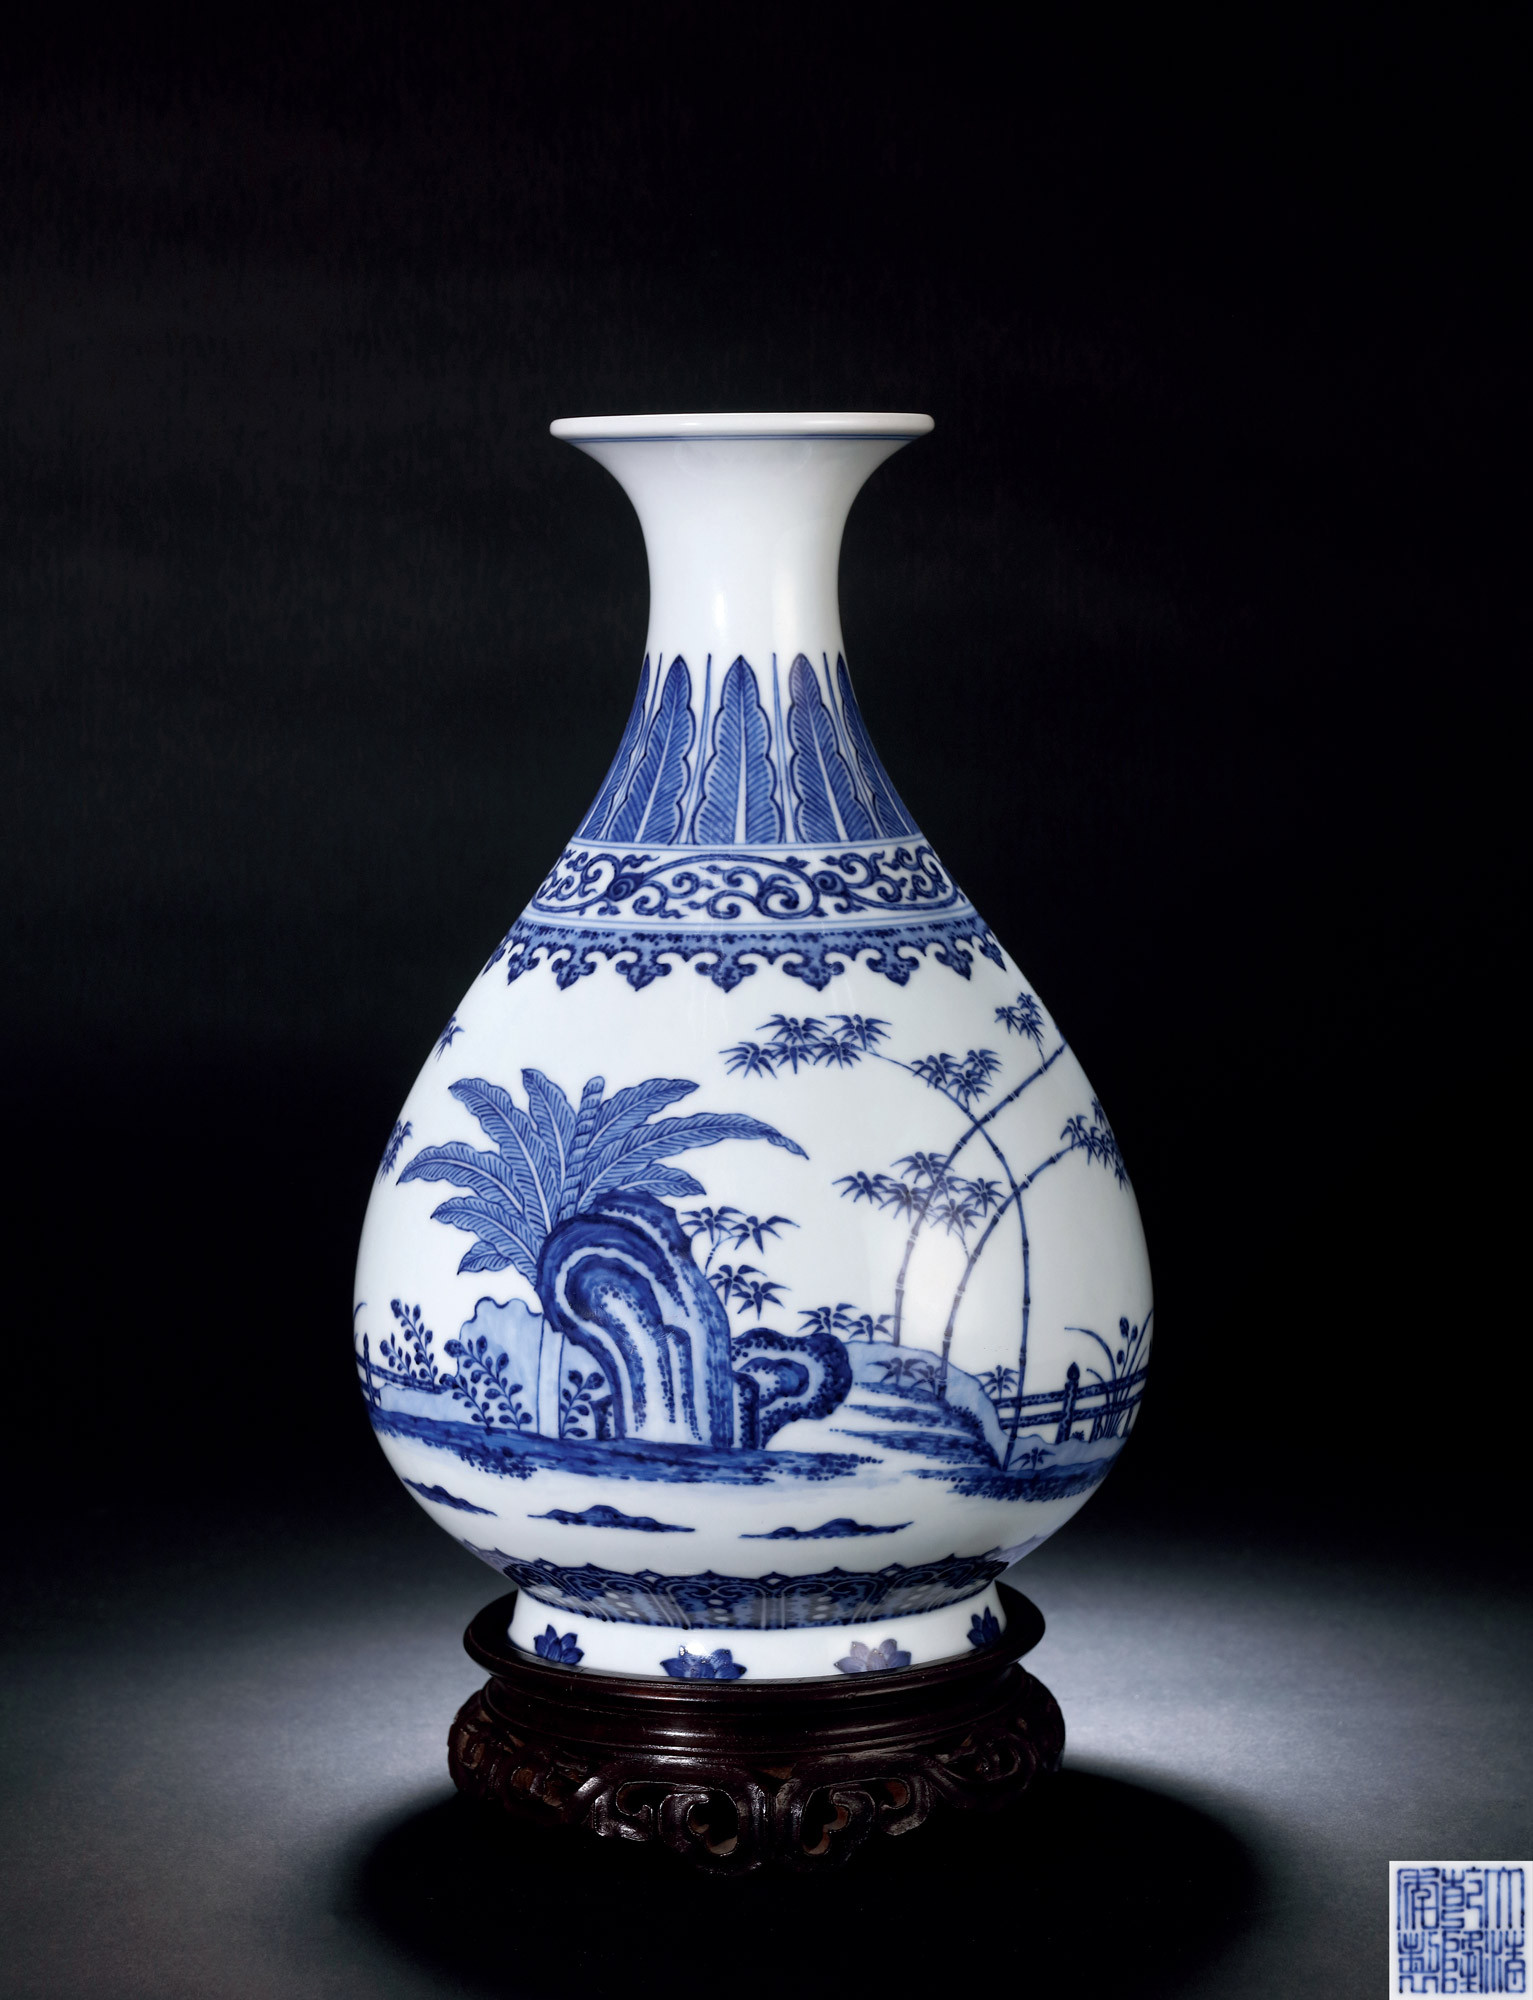 A BLUE AND WHITE‘PLANTAIN AND ROCK’ PEAR-SHAPED VASE, YUHUCHUN